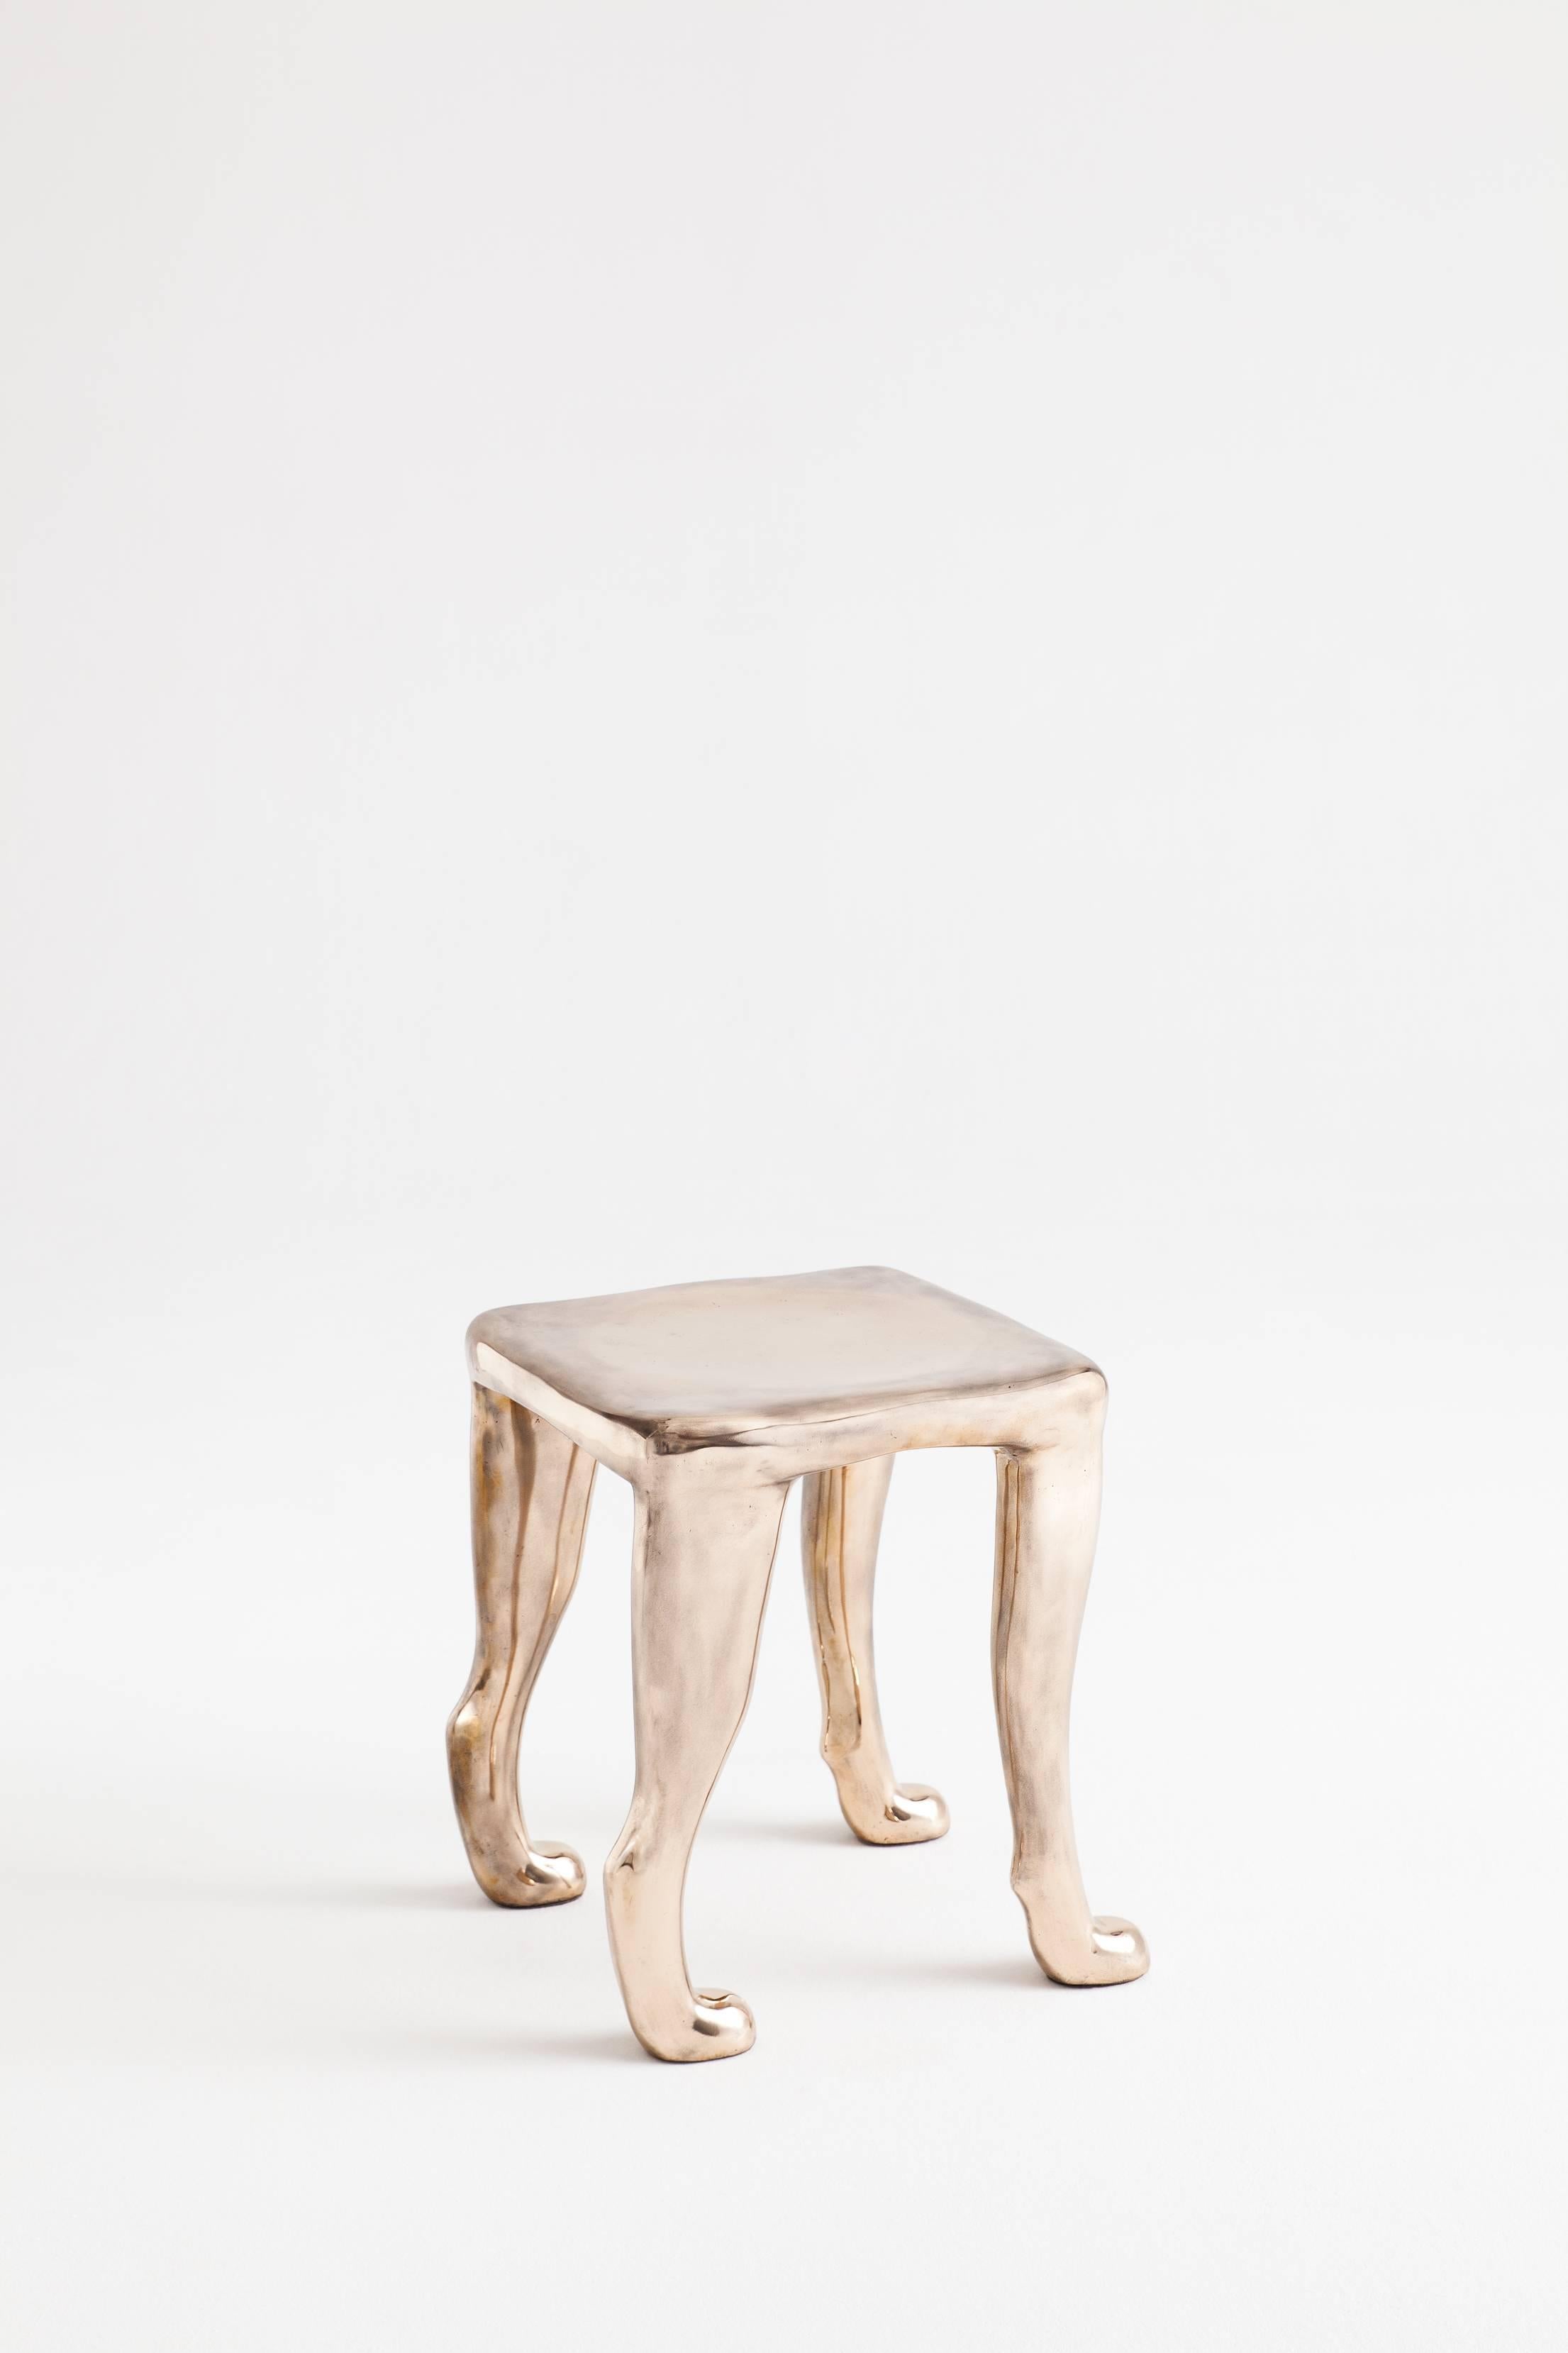 Khamon is a cast bronze stool built as a sculpture. The inspiration for Khamon comes from the willingness to dignify the stool as a piece of furniture often forgotten.
It has a polished finish made by an artisan.

Limited edition of eight